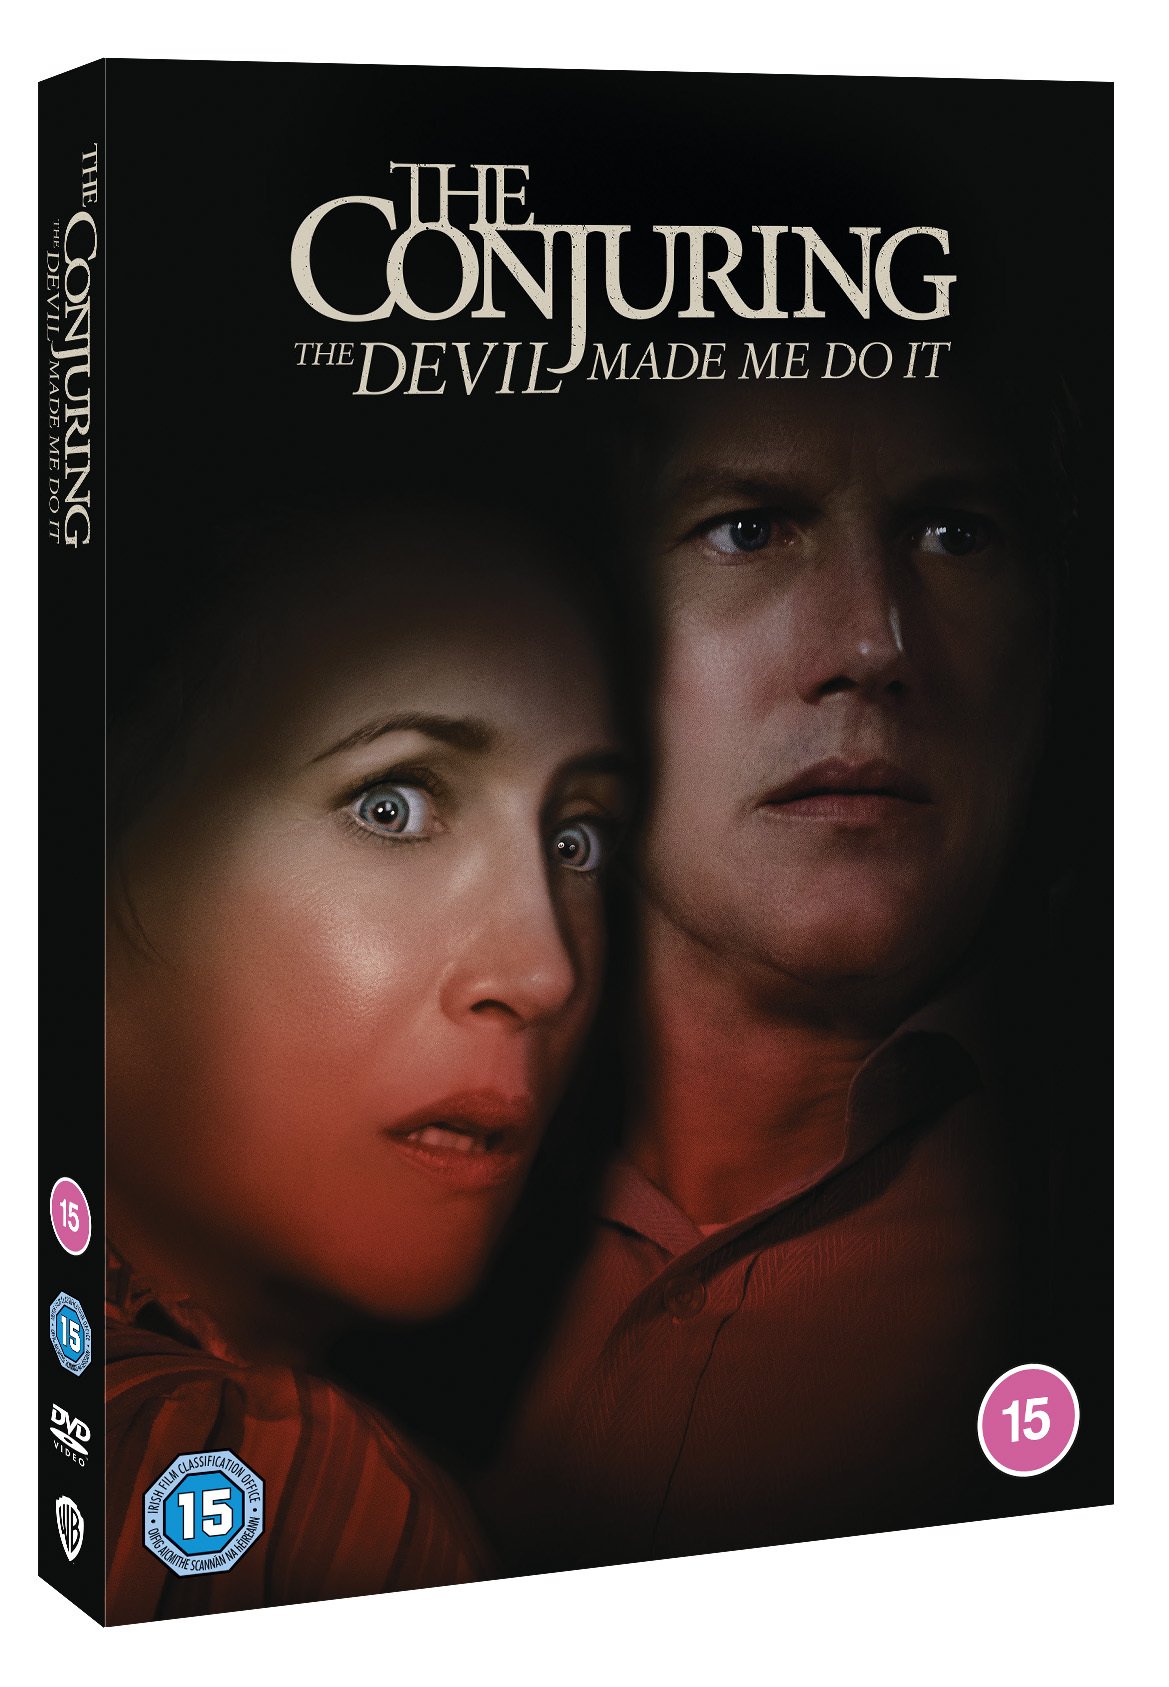 The Conjuring: The Devil Made Me Do It (DVD)